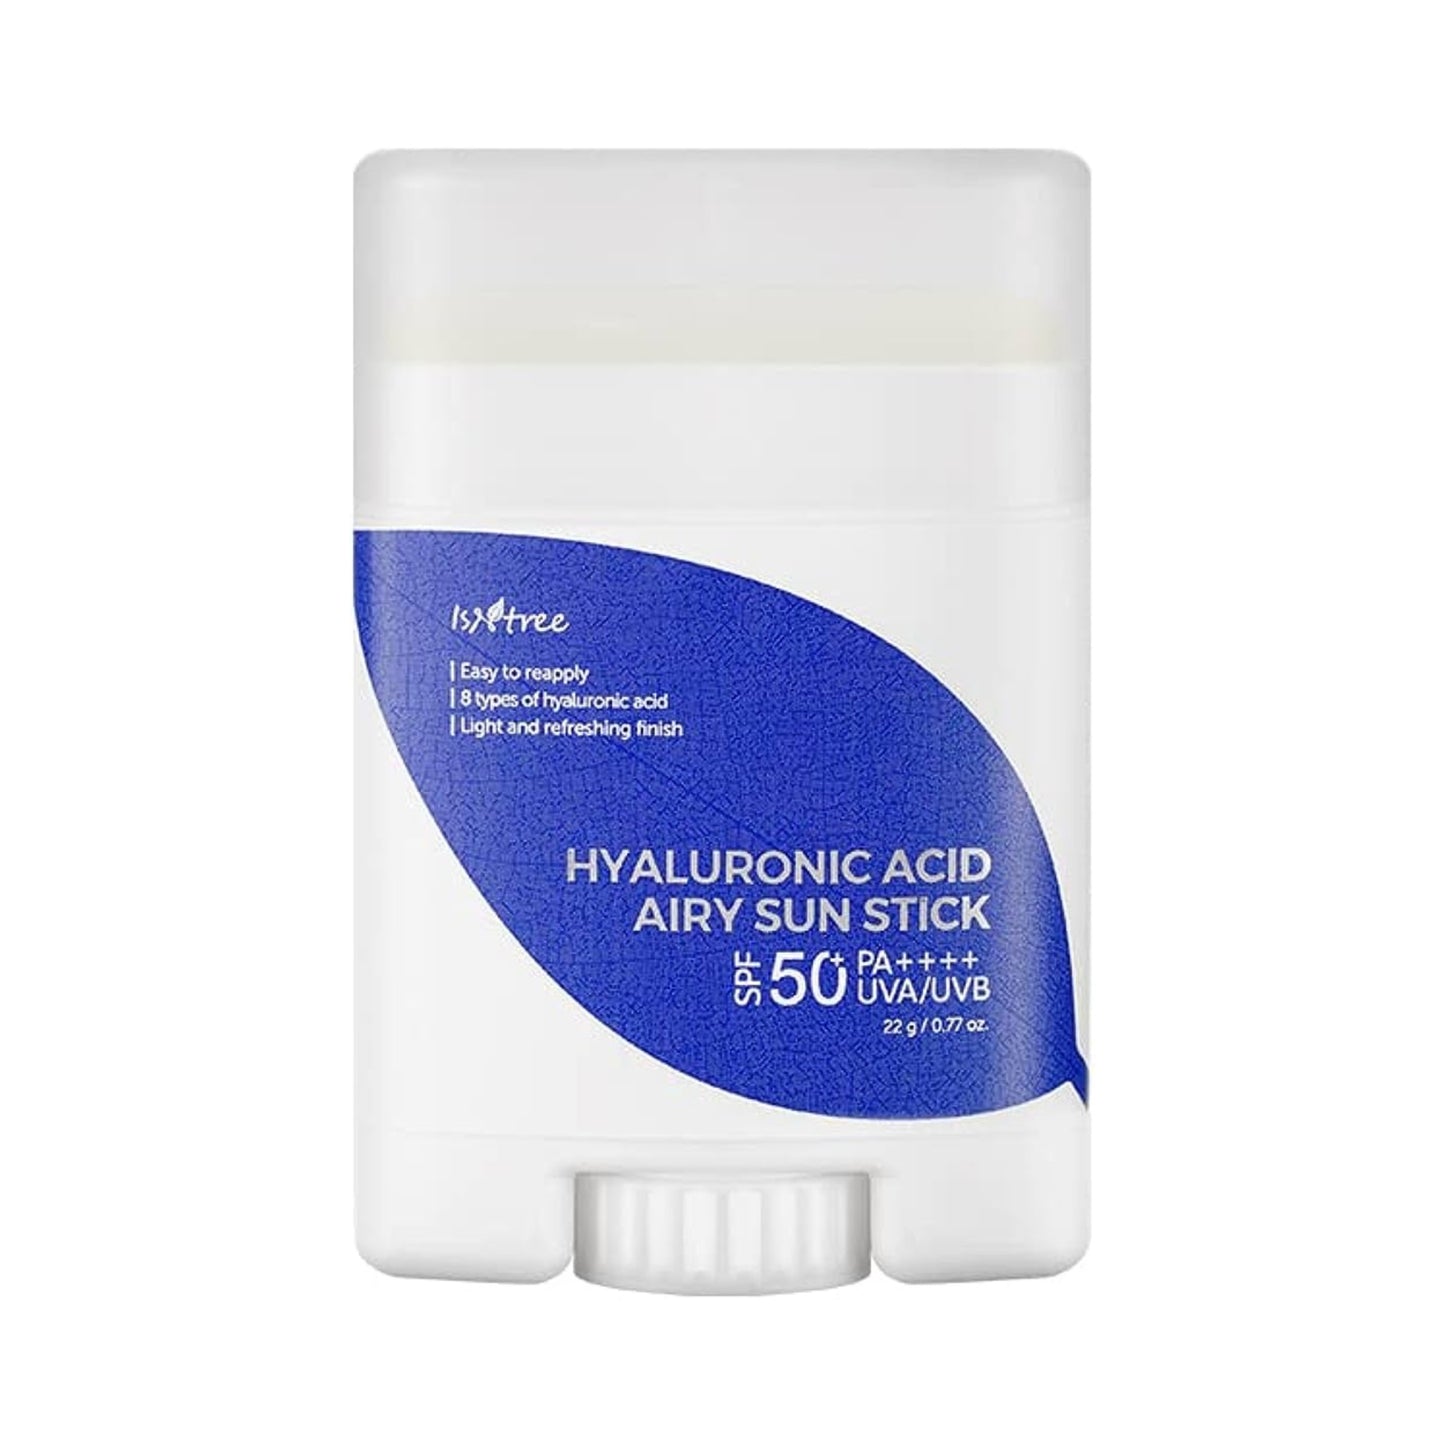 ISNTREE Hyaluronic Acid Airy Sun Stick